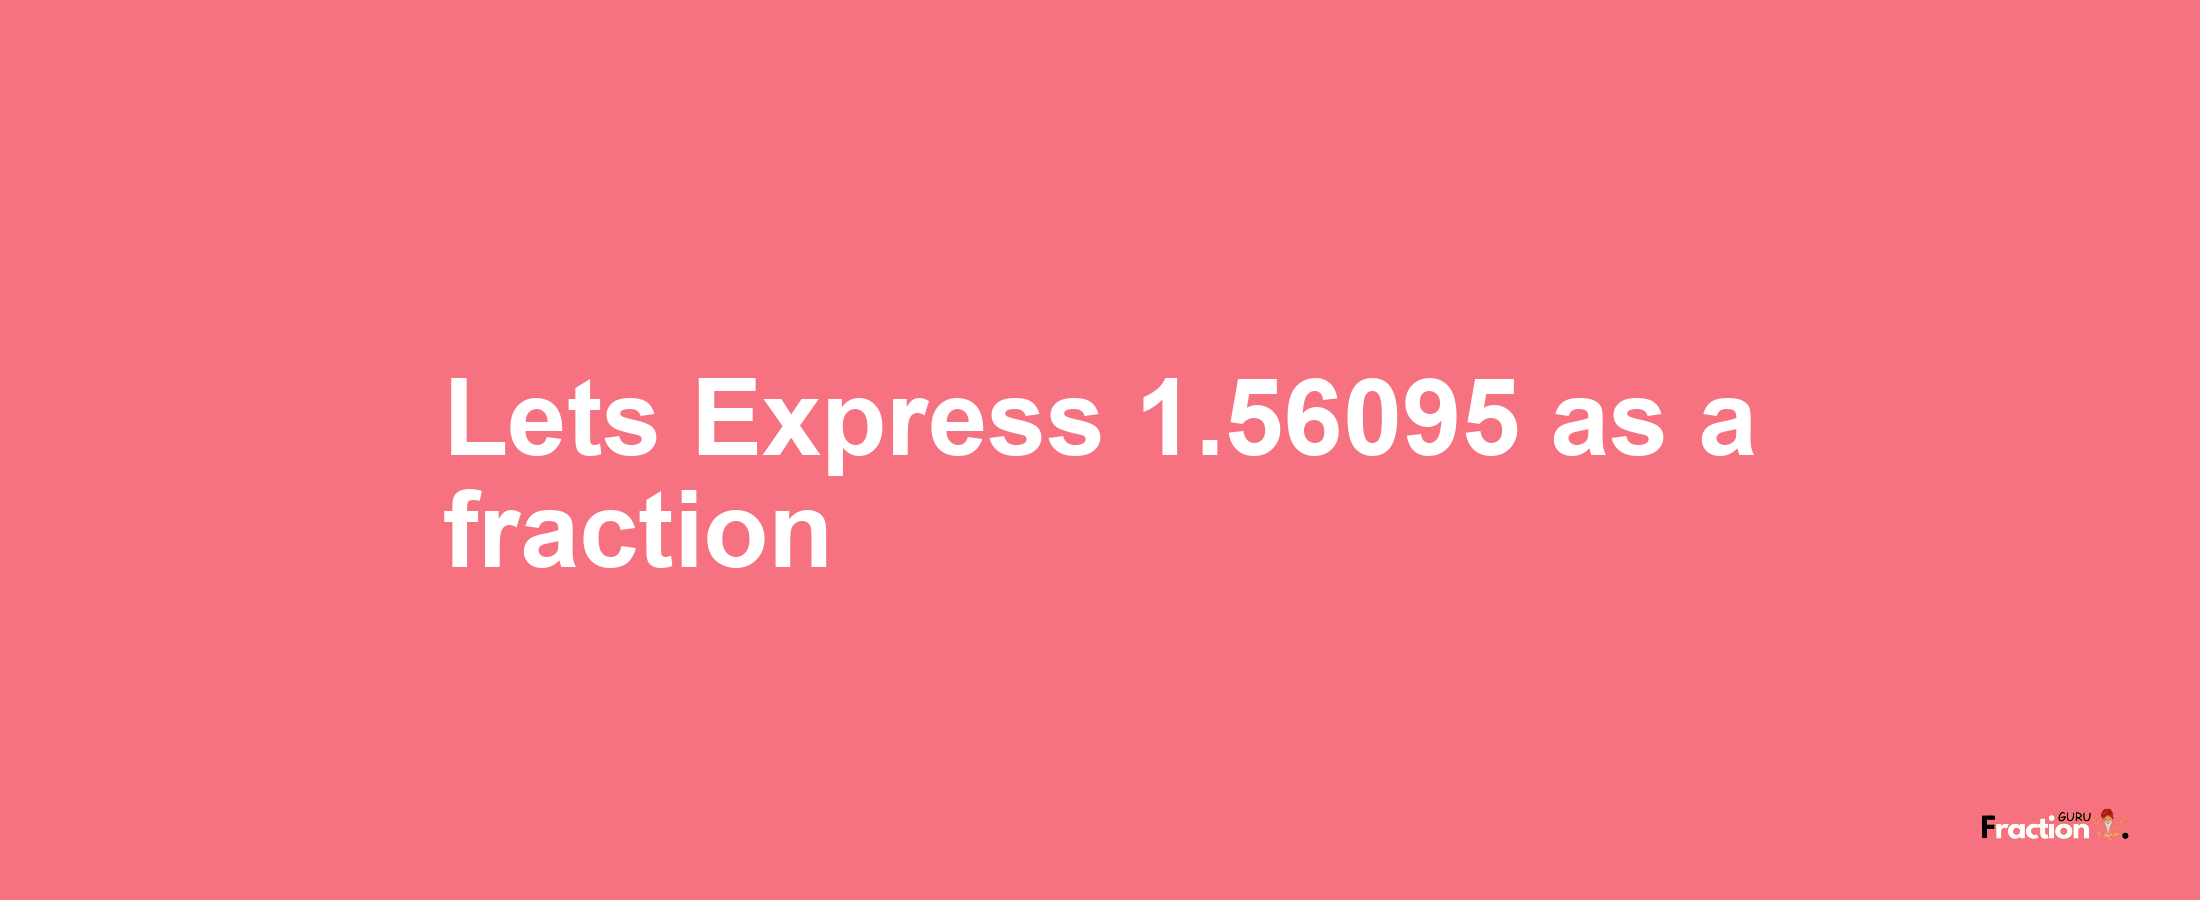 Lets Express 1.56095 as afraction